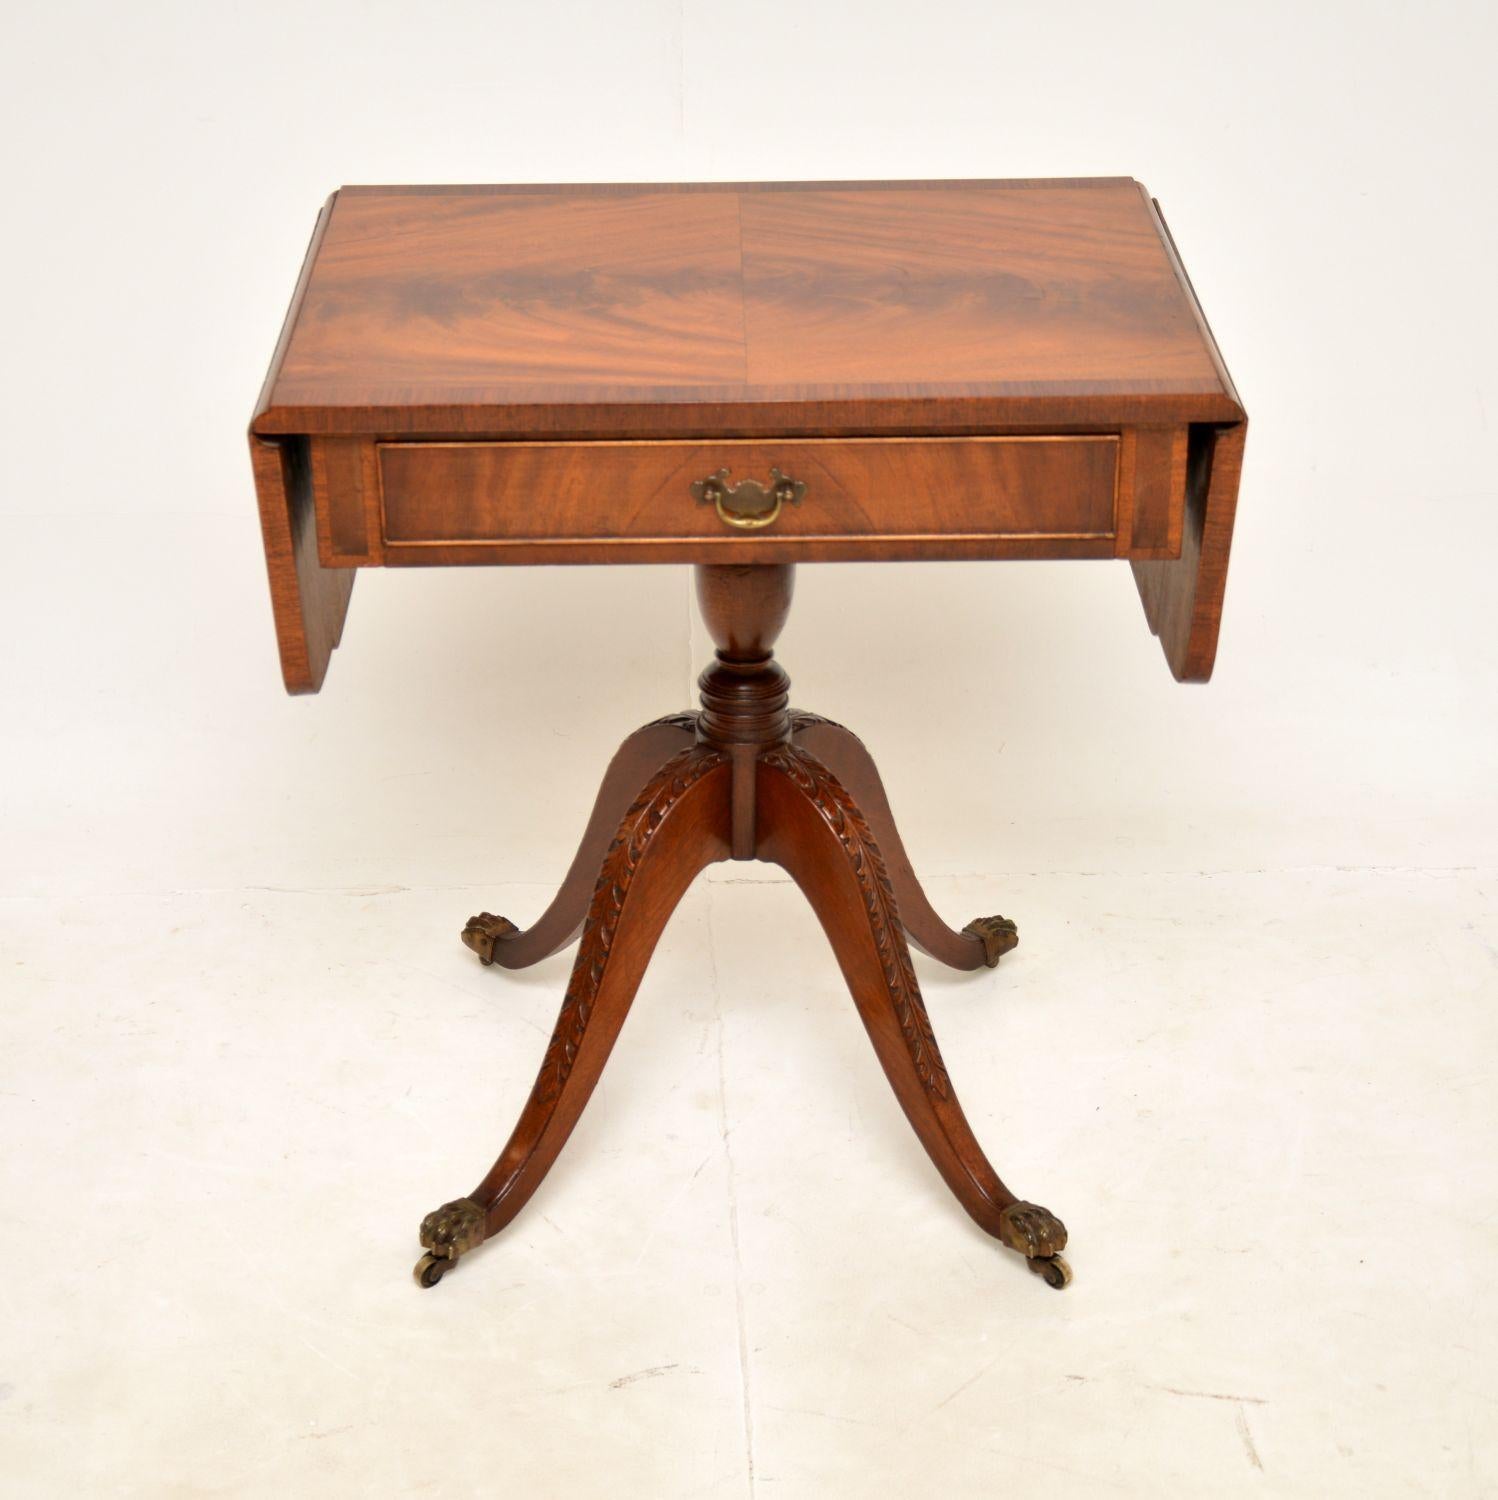 A beautiful and very well made antique drop leaf side table. This was made in England,it dates from around the 1930s.

It is of superb quality, with lovely flamed grain patterns. The top is cross banded and has two drop down leaves that can lift